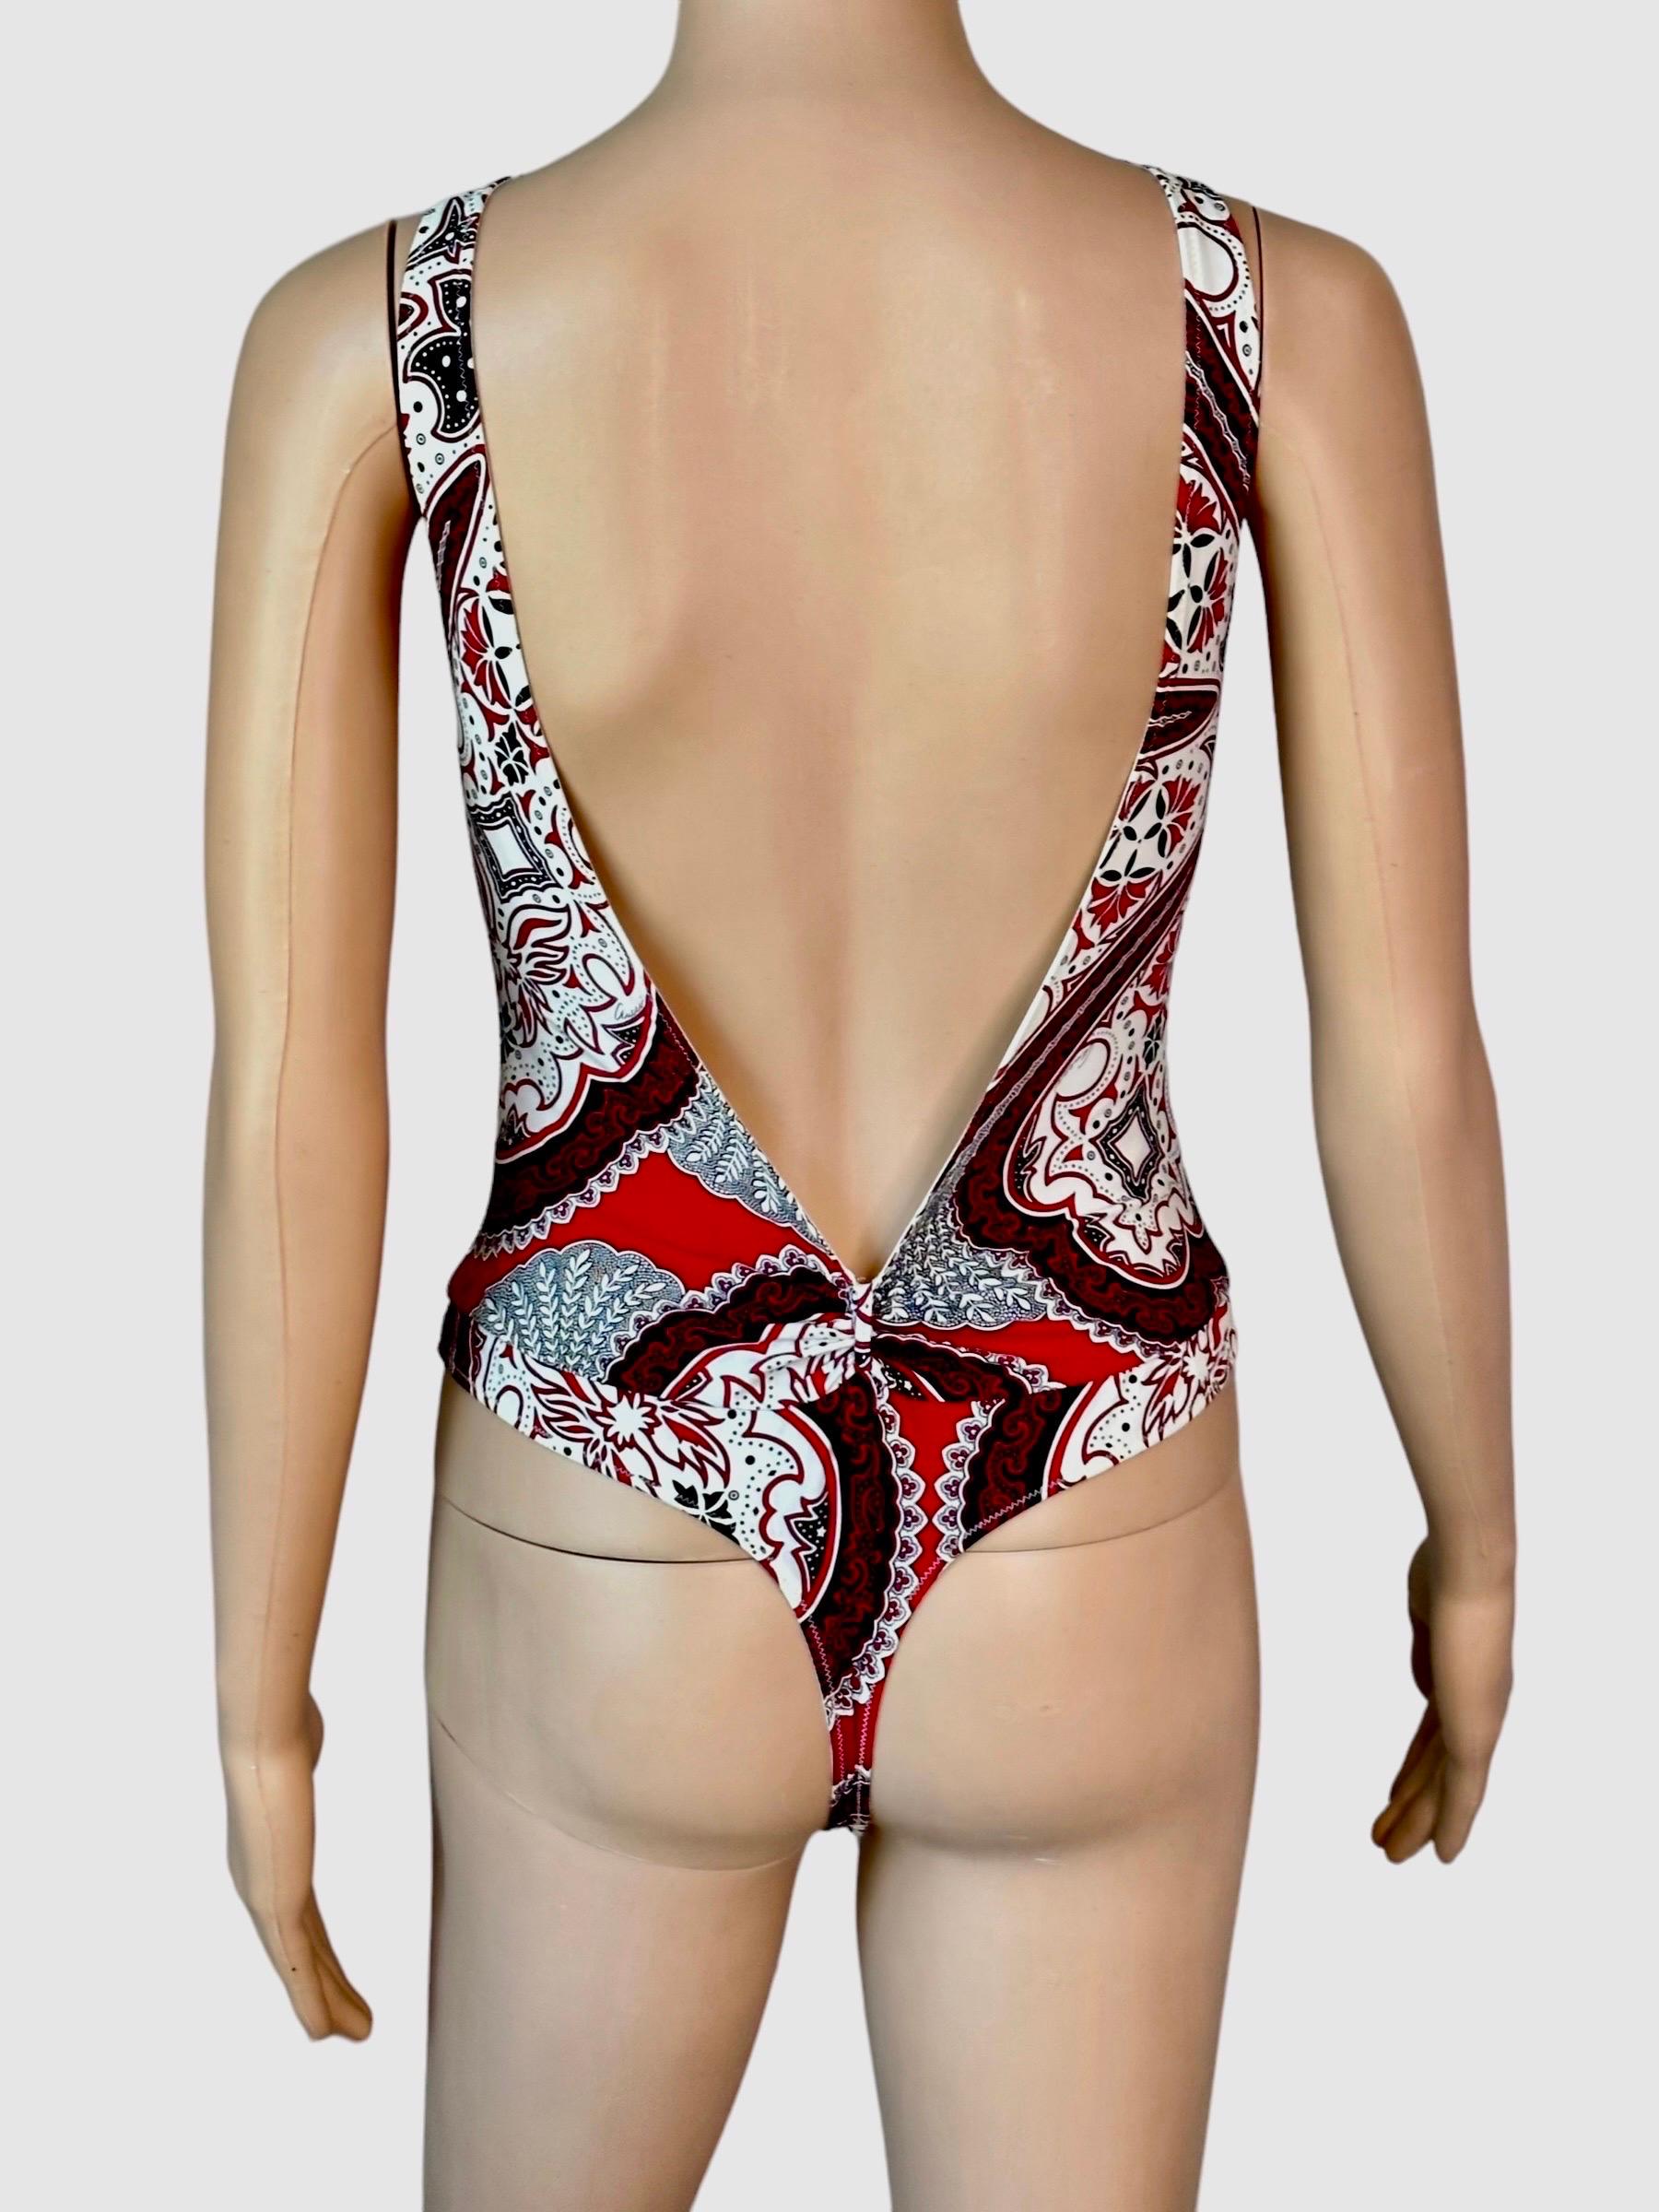 Tom Ford for Gucci Cruise 2004 Unworn One Piece Bodysuit Swimsuit Swimwear  For Sale 3